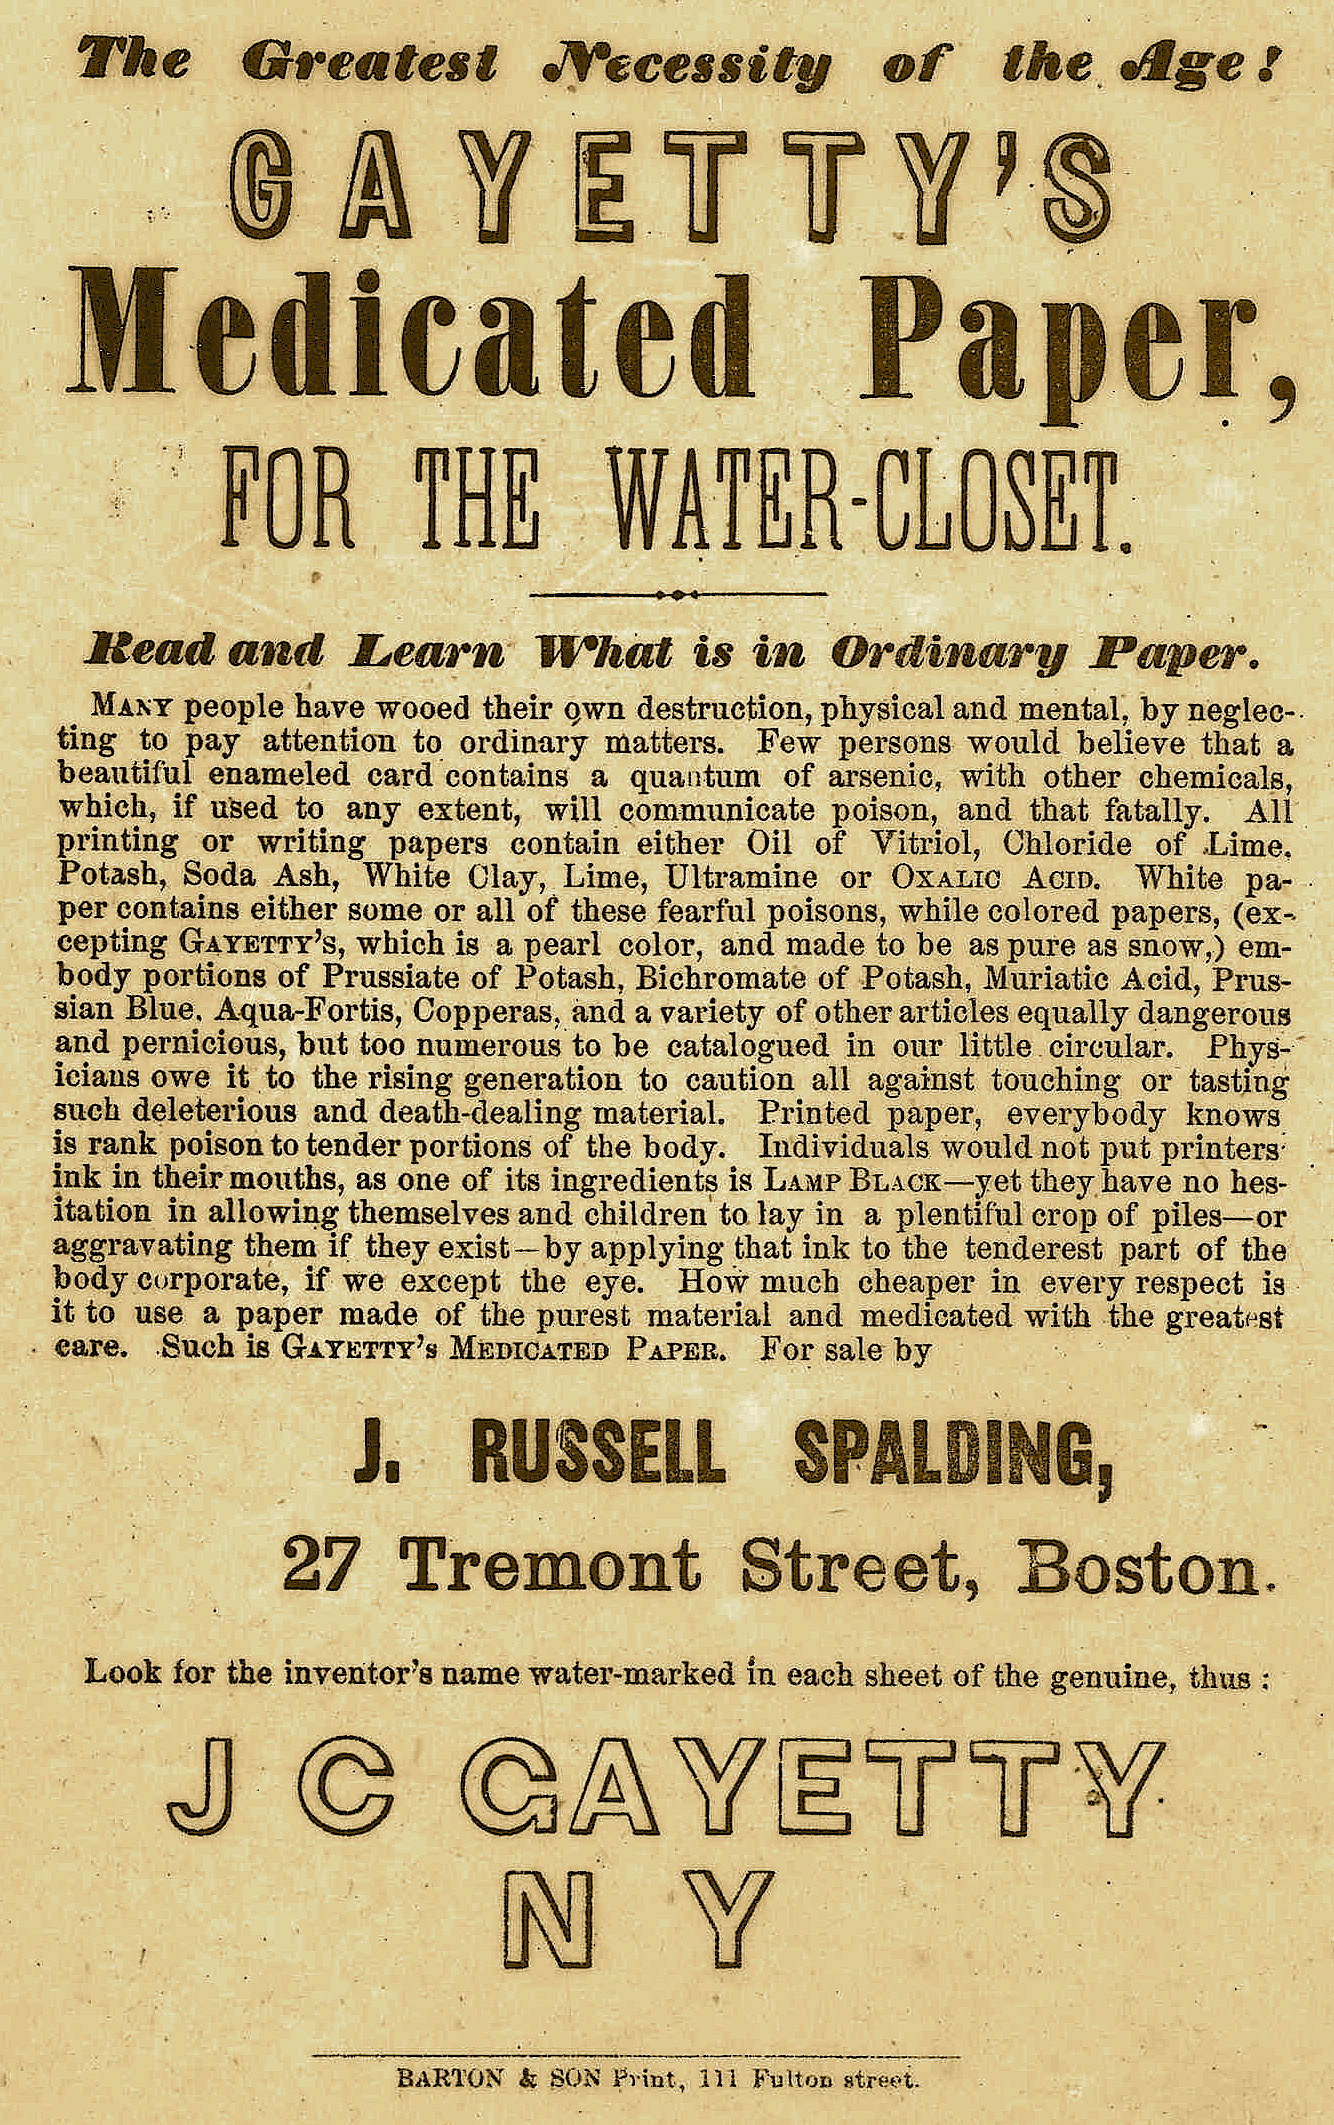 An 1859 advertisement for Gayetty's Medicated Paper for the Watercloset